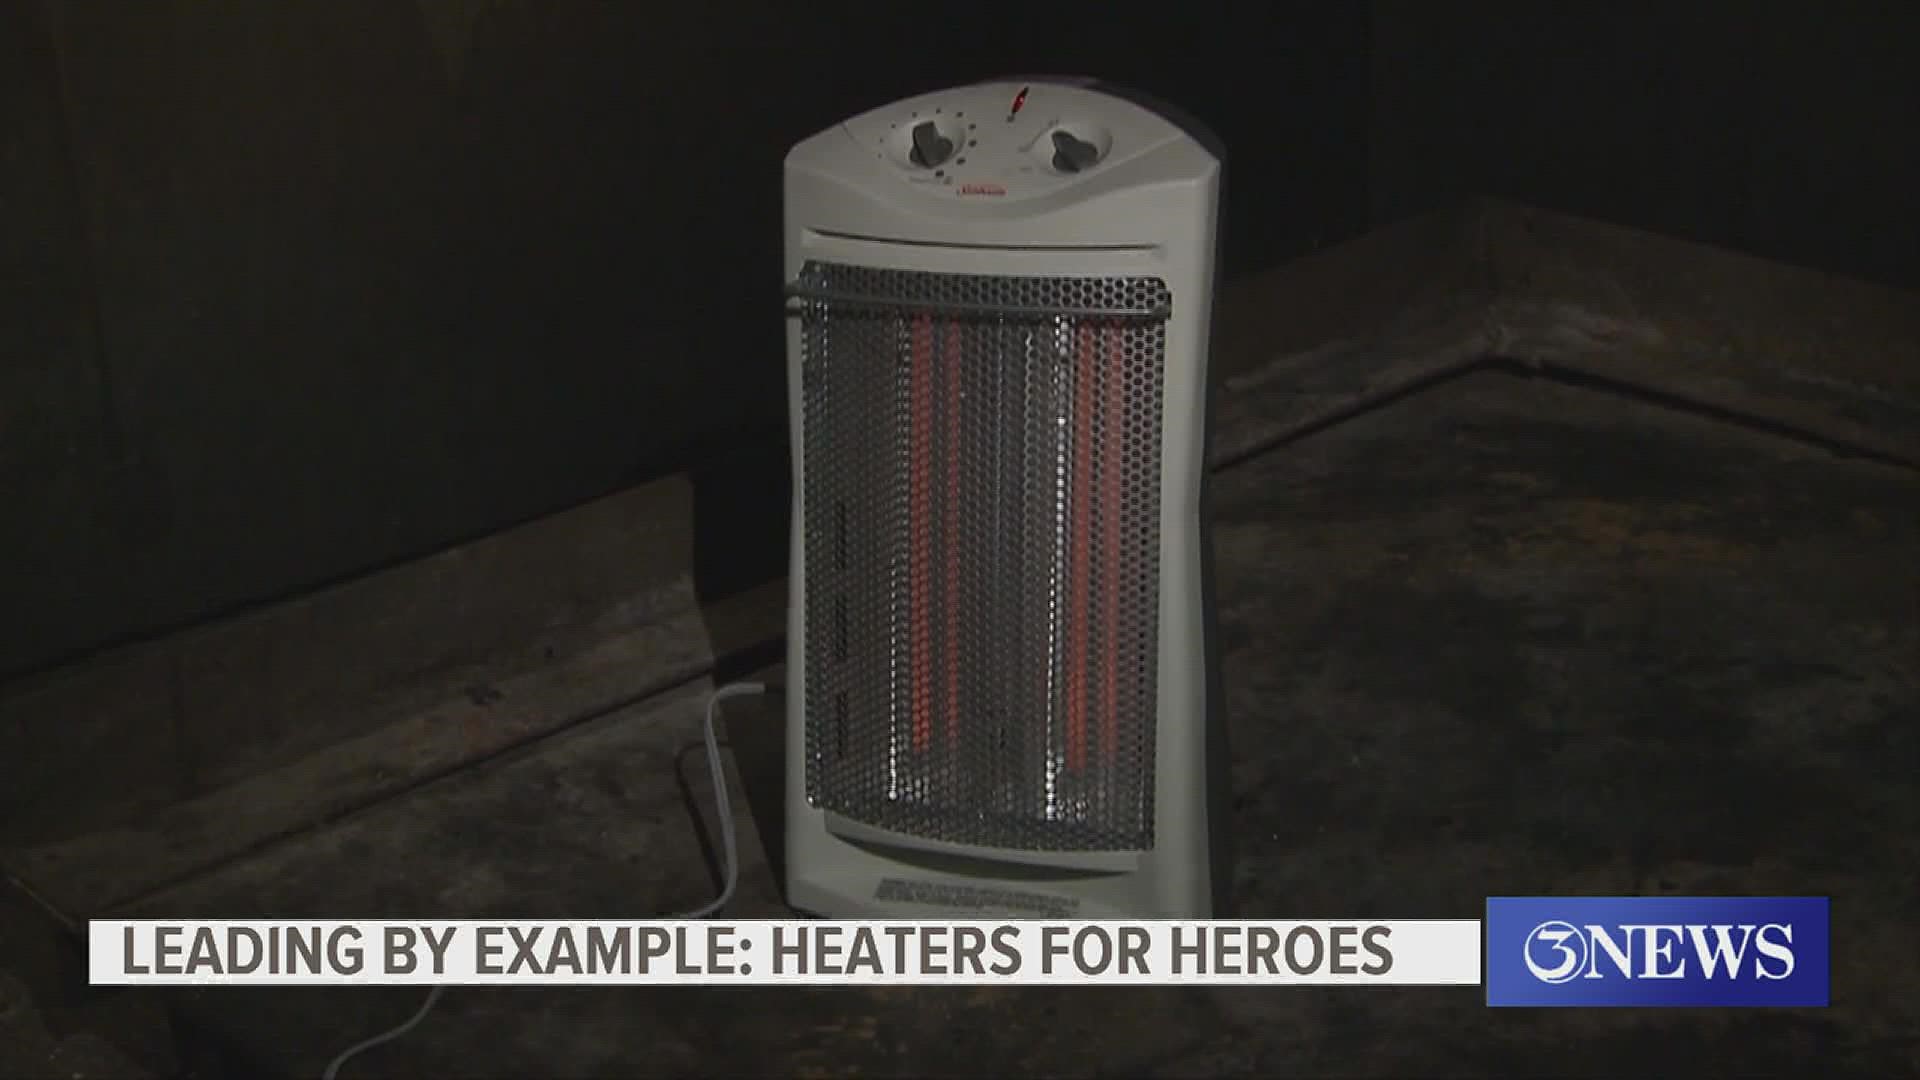 Since Salinas started the program, 10 heaters have been given to veterans who have served all over the country.